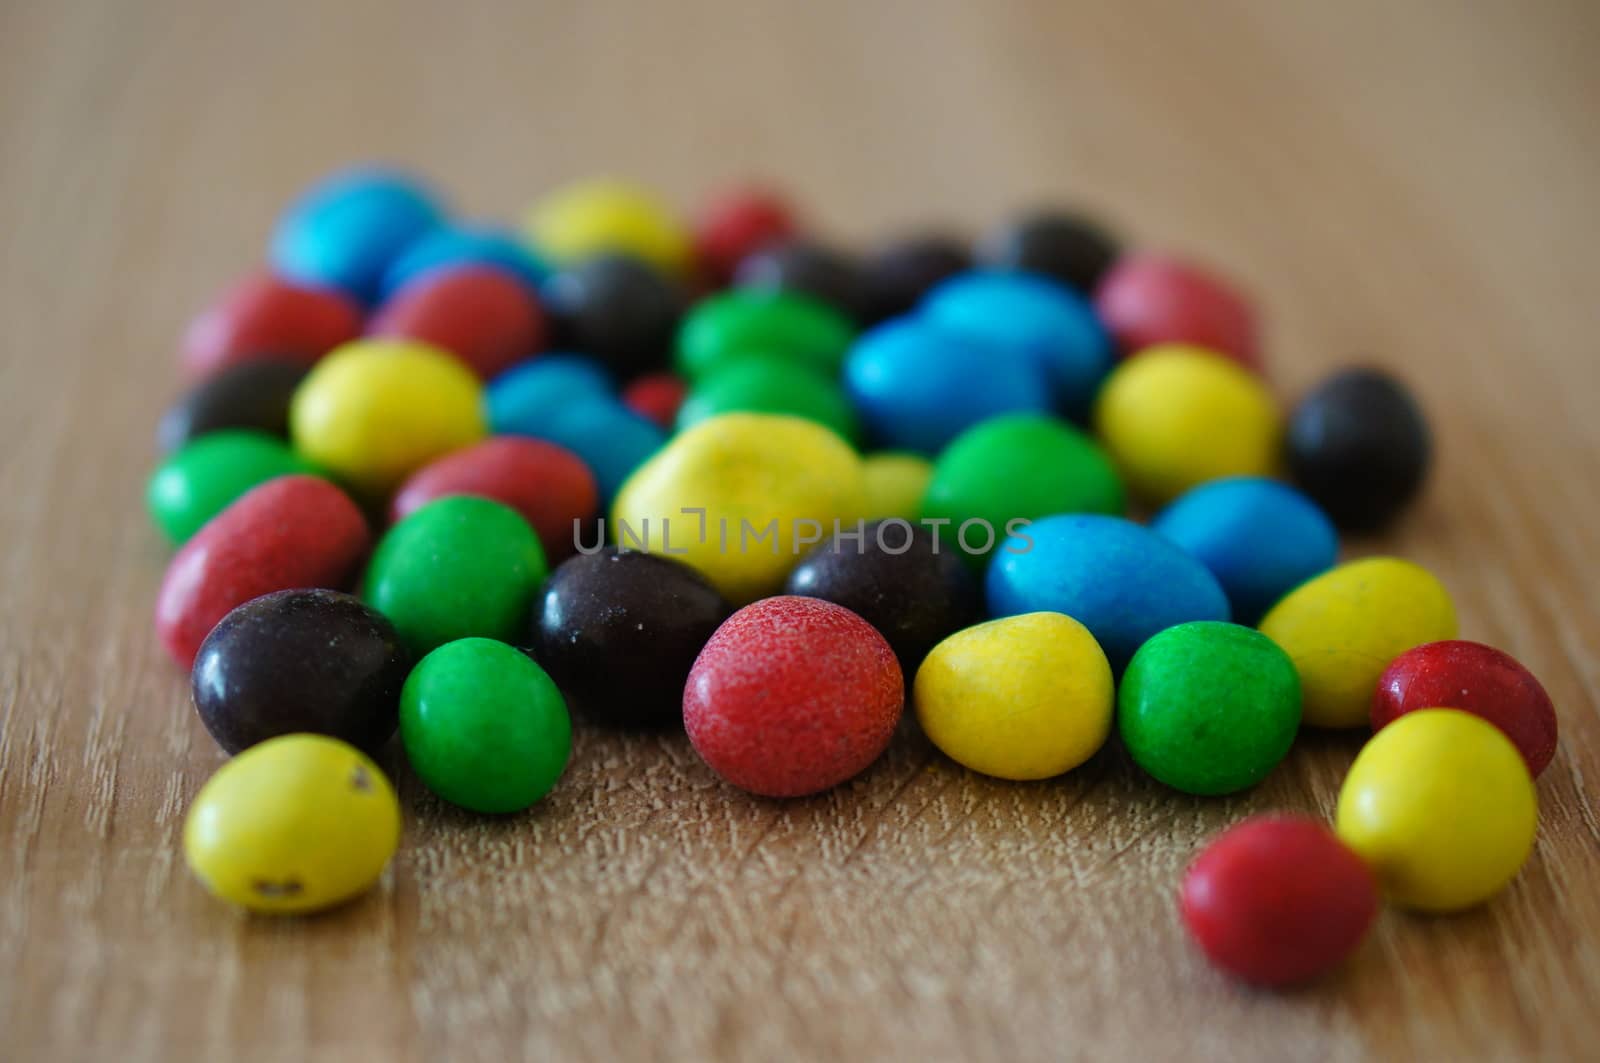 Chocolate peanuts mix on wooden background